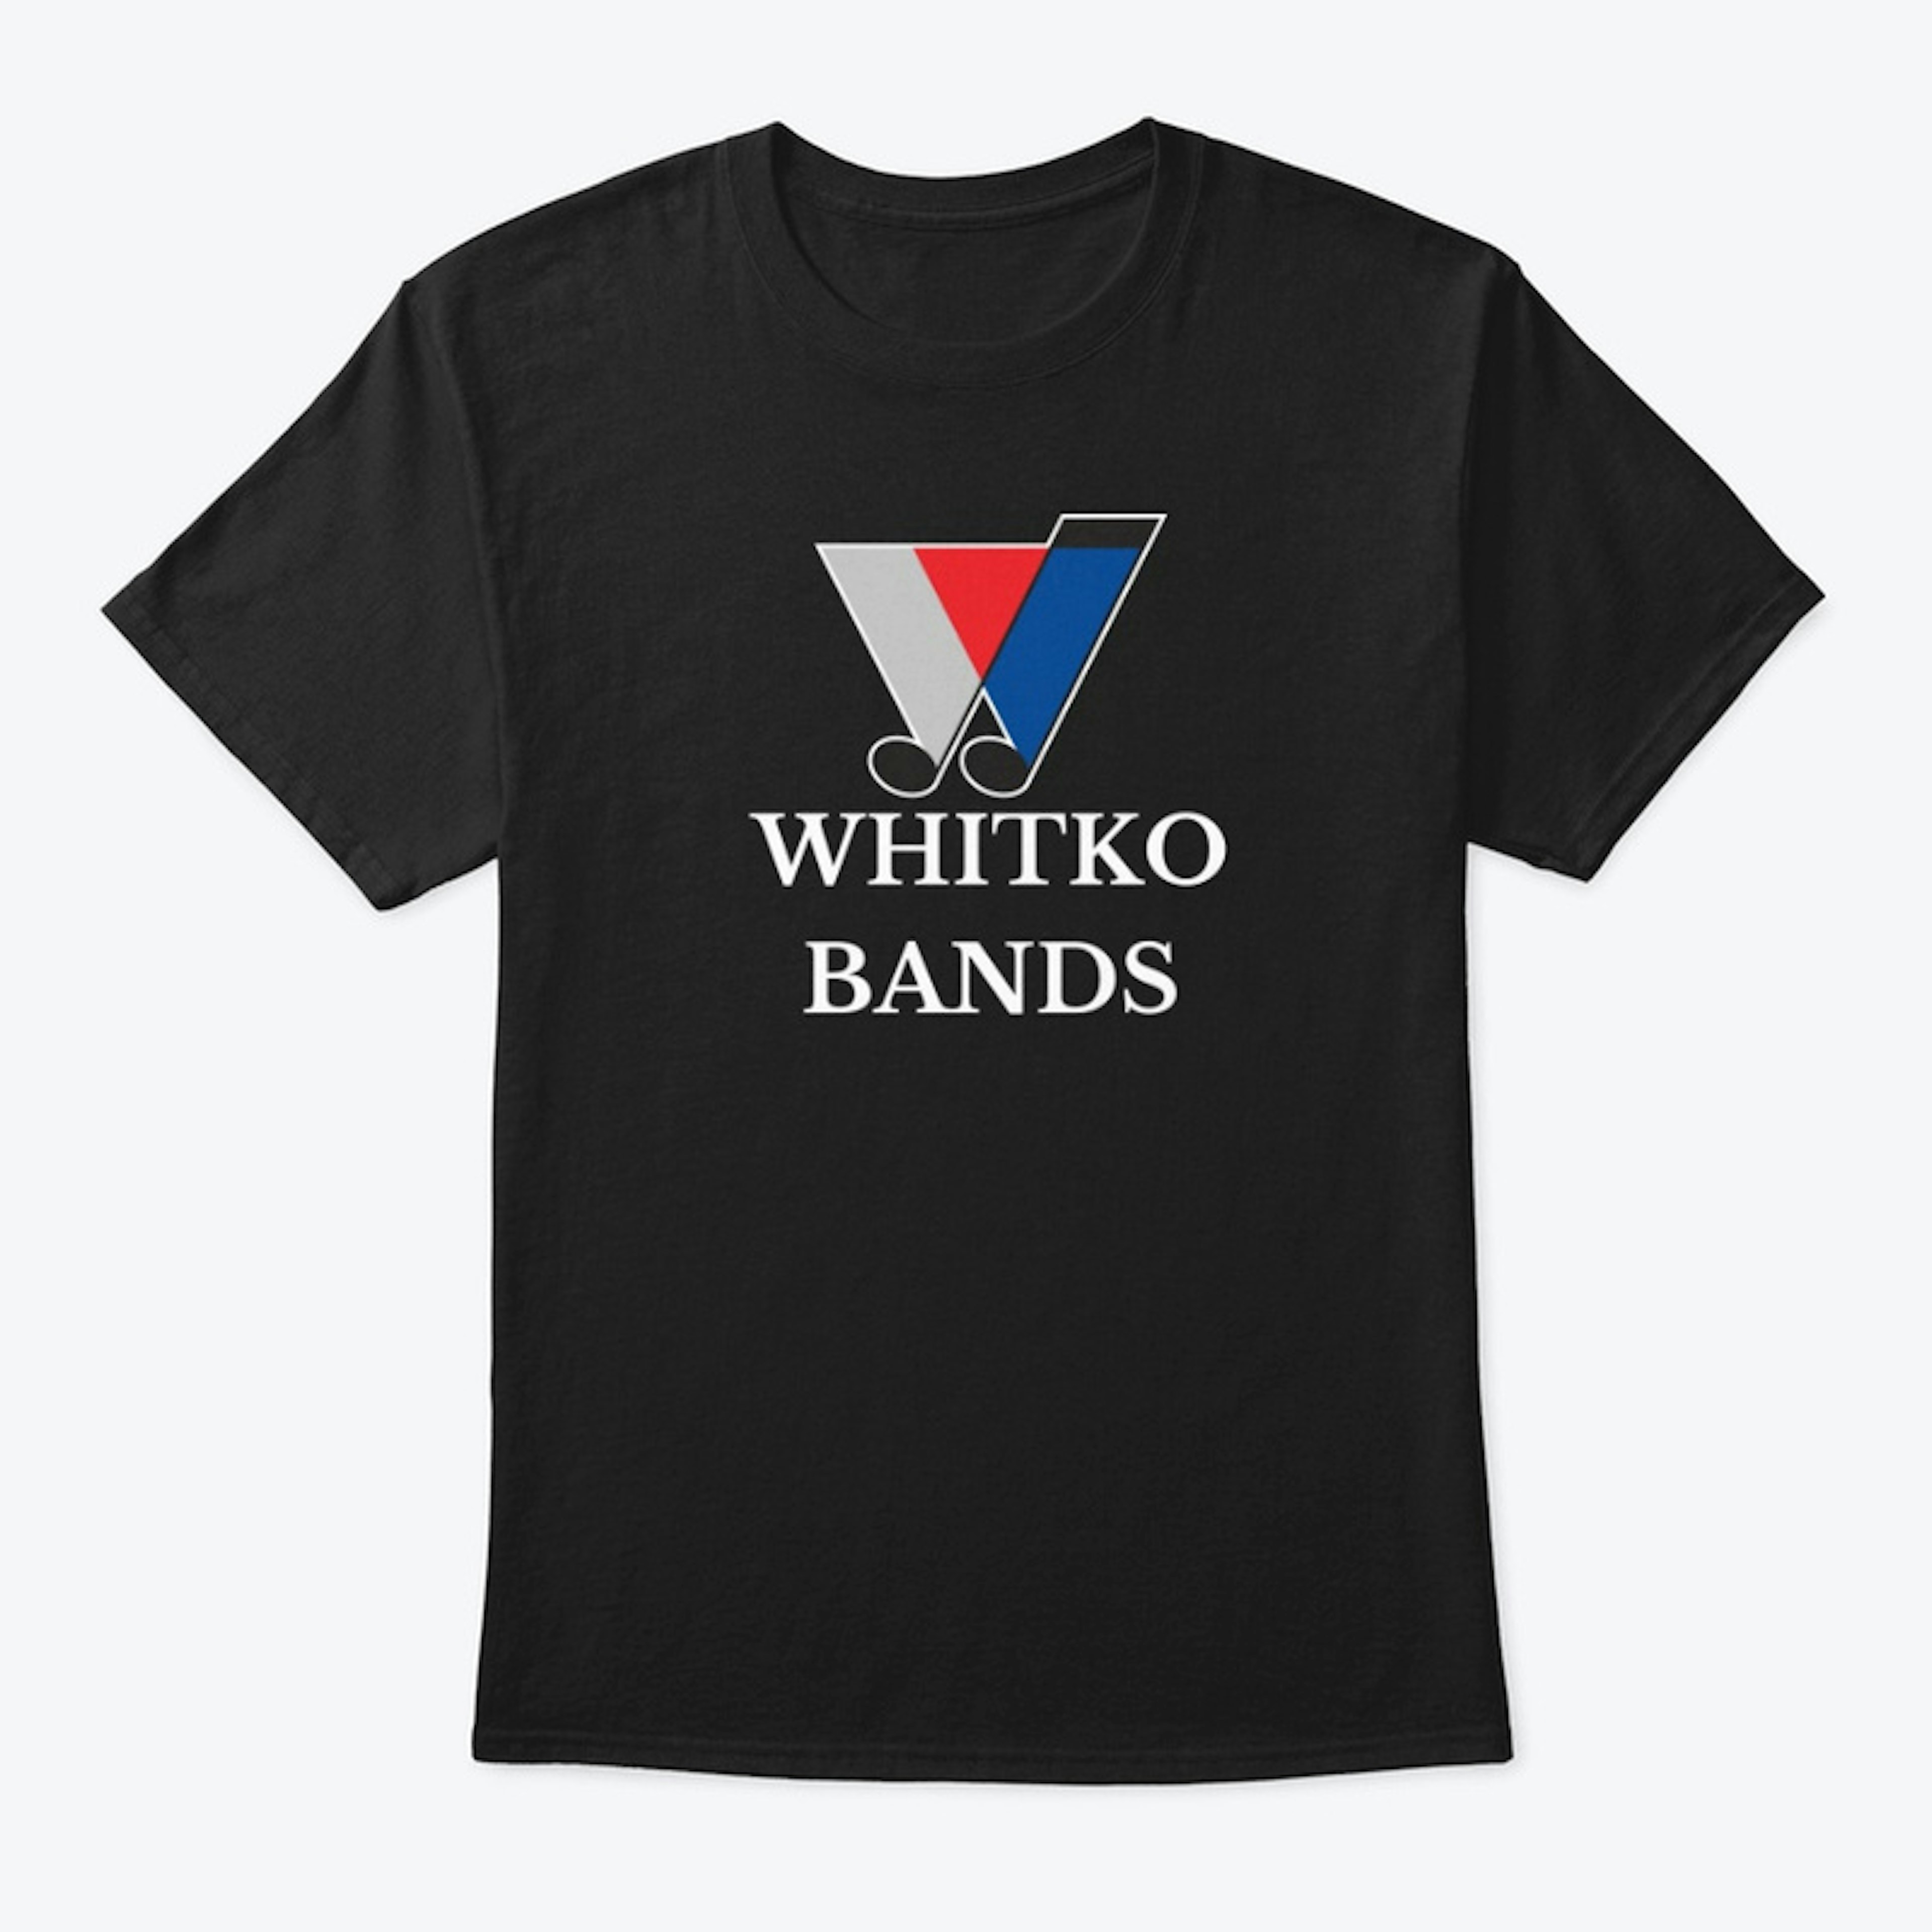 Whitko Bands